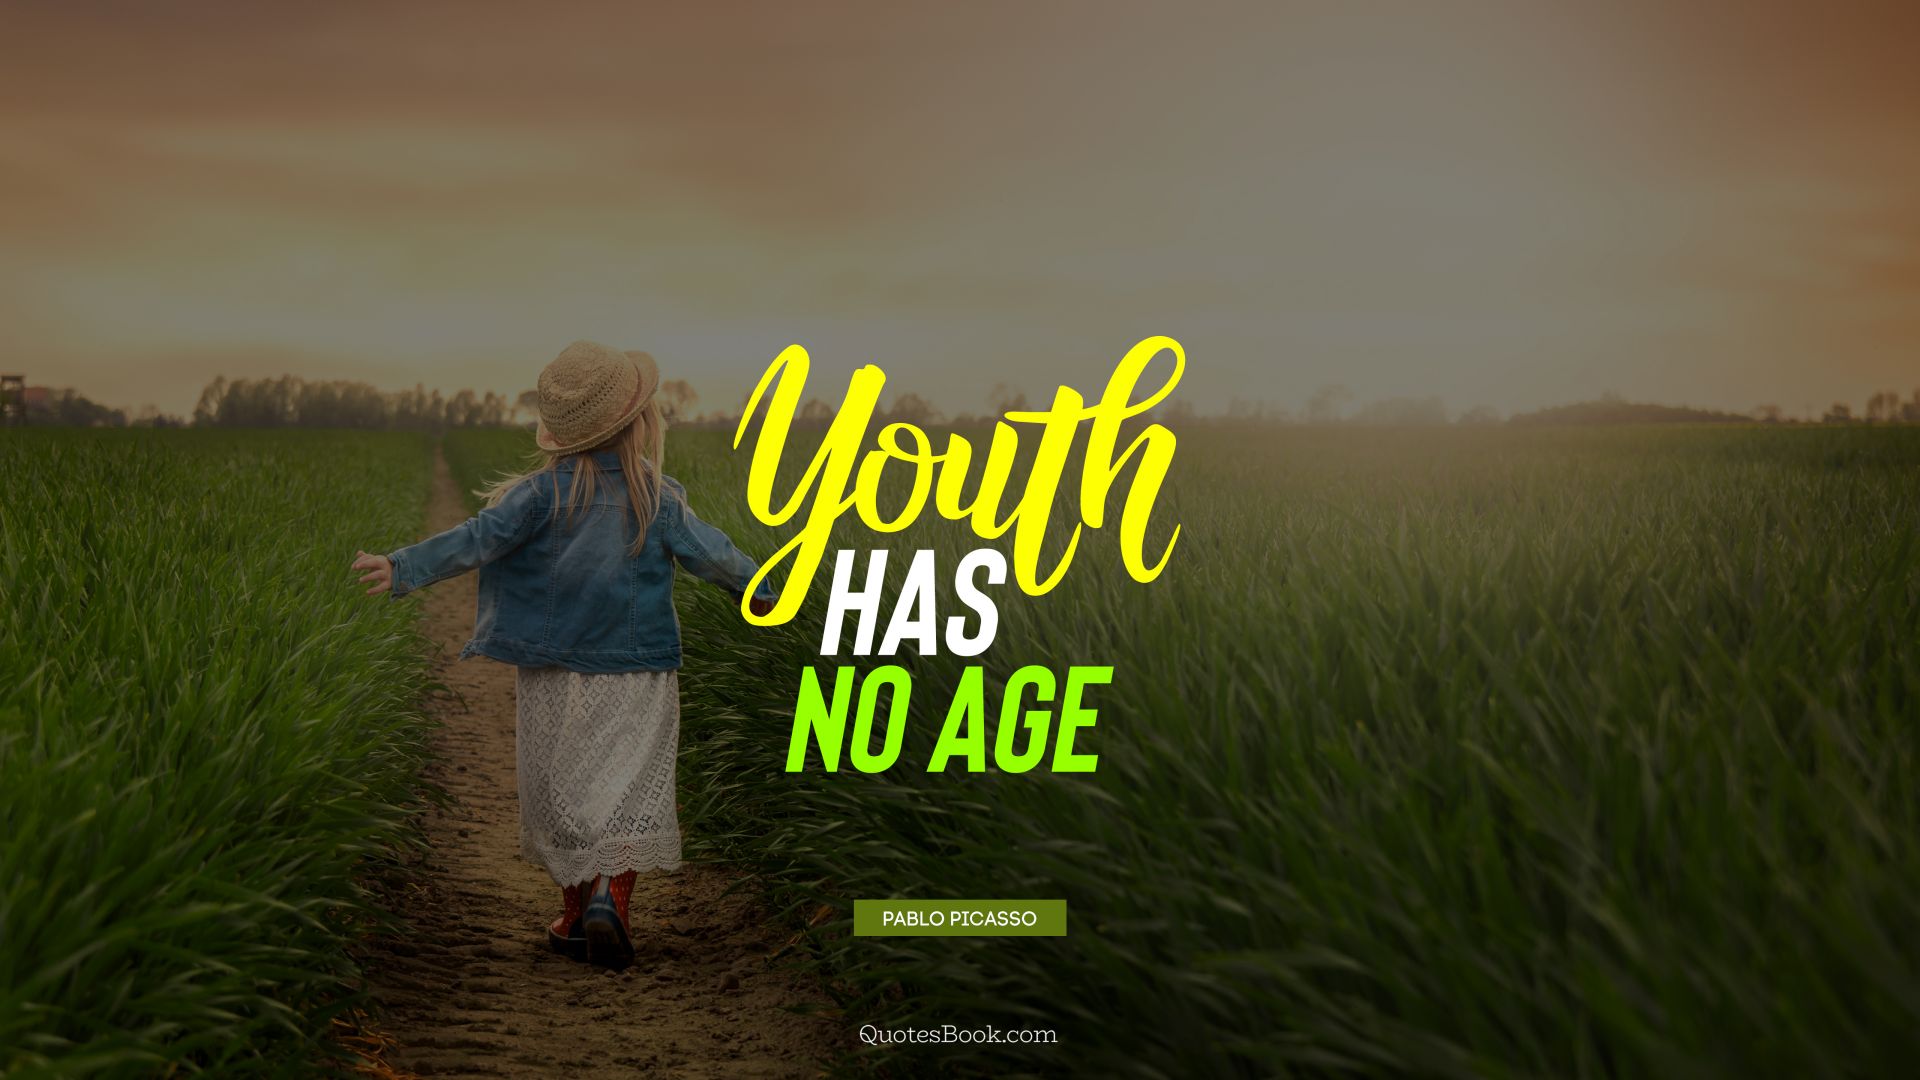 Youth has no age. - Quote by Pablo Picasso